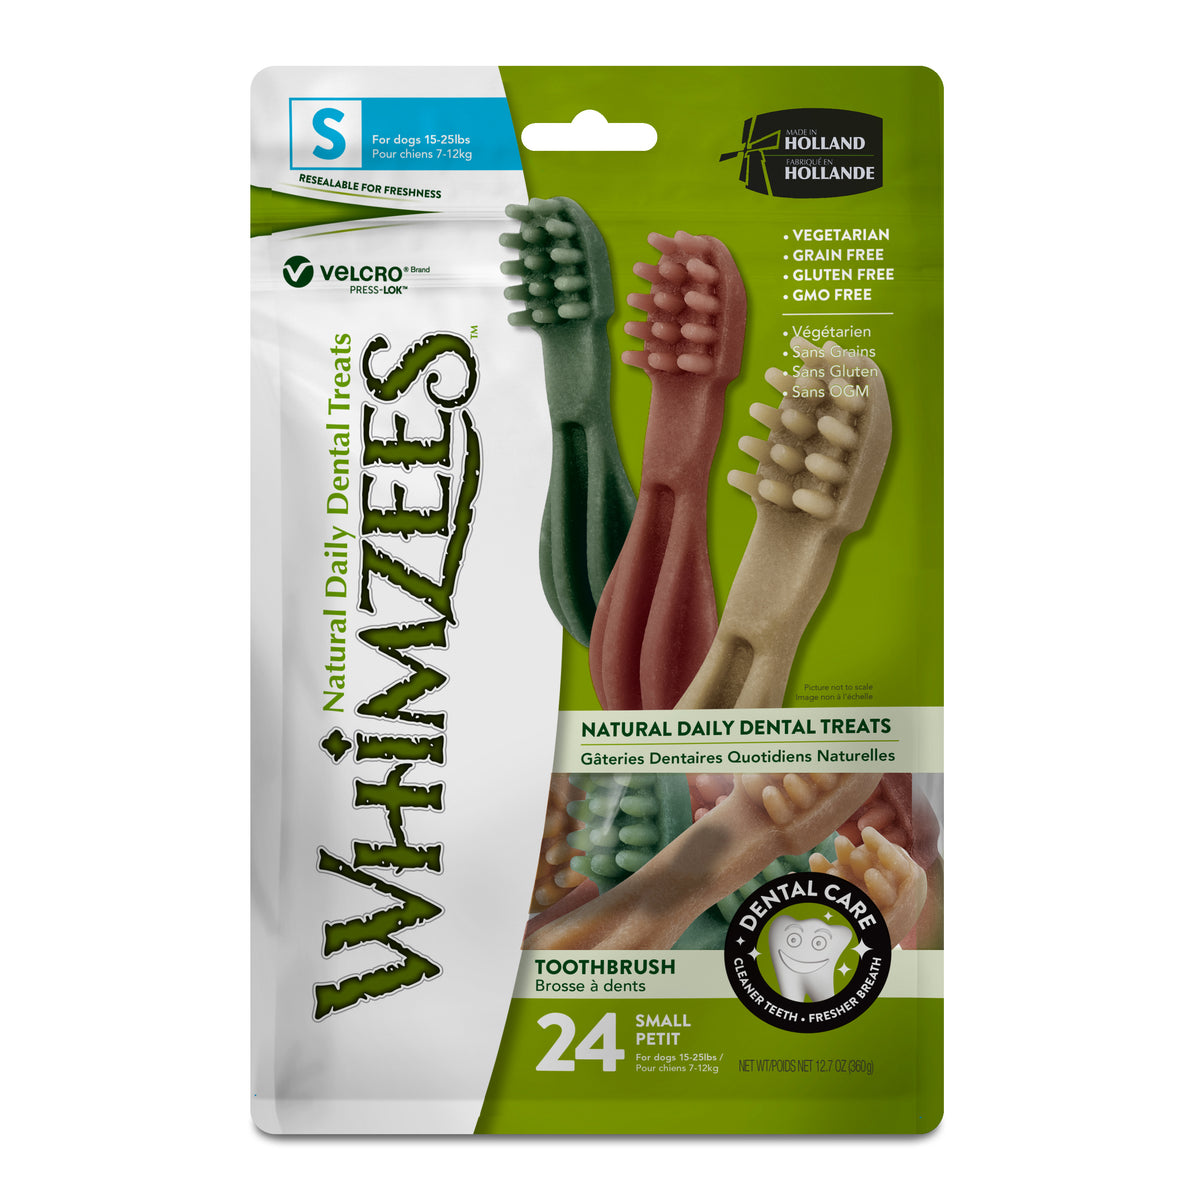 Whimzees Toothbrush All Natural Daily Dental Treats for Dogs - Value Pack